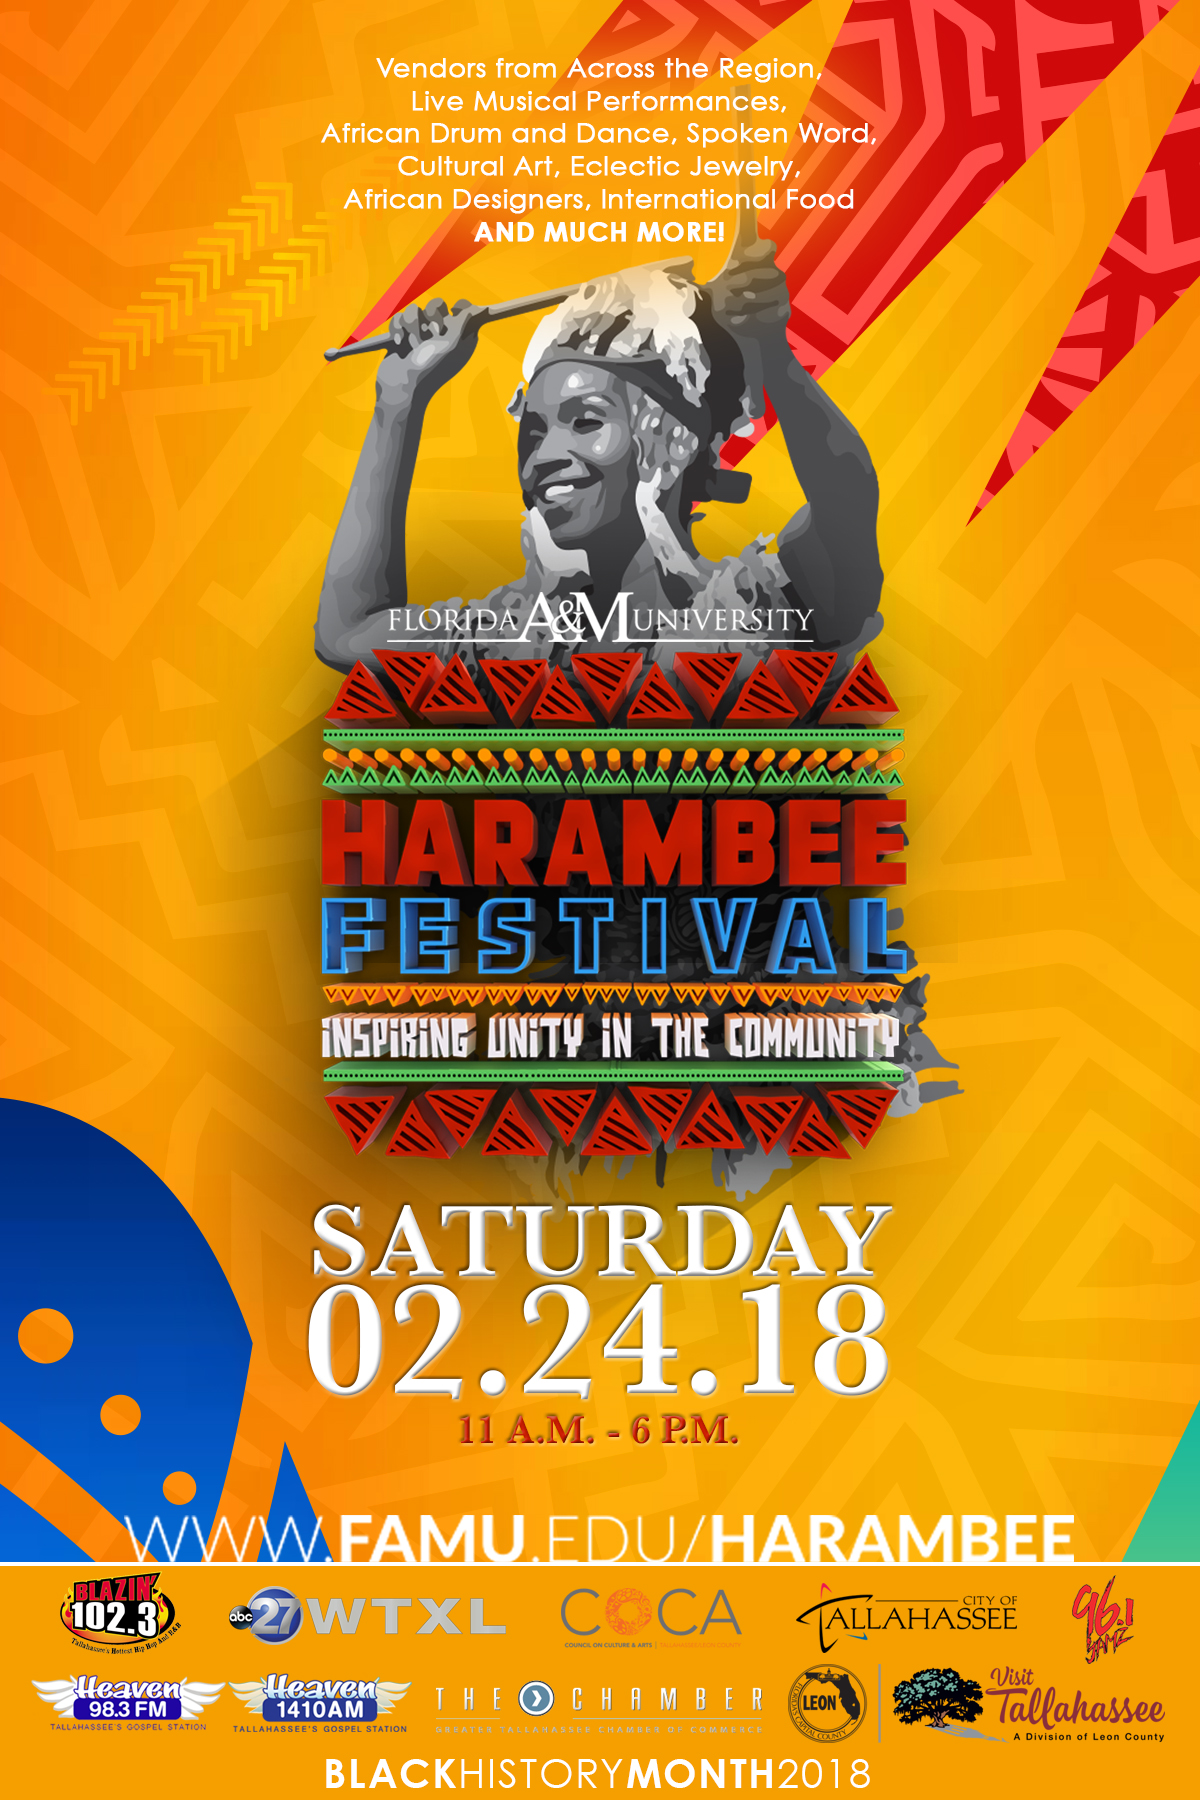 The FAMU Harambee Festival, Florida Agricultural and Mechanical